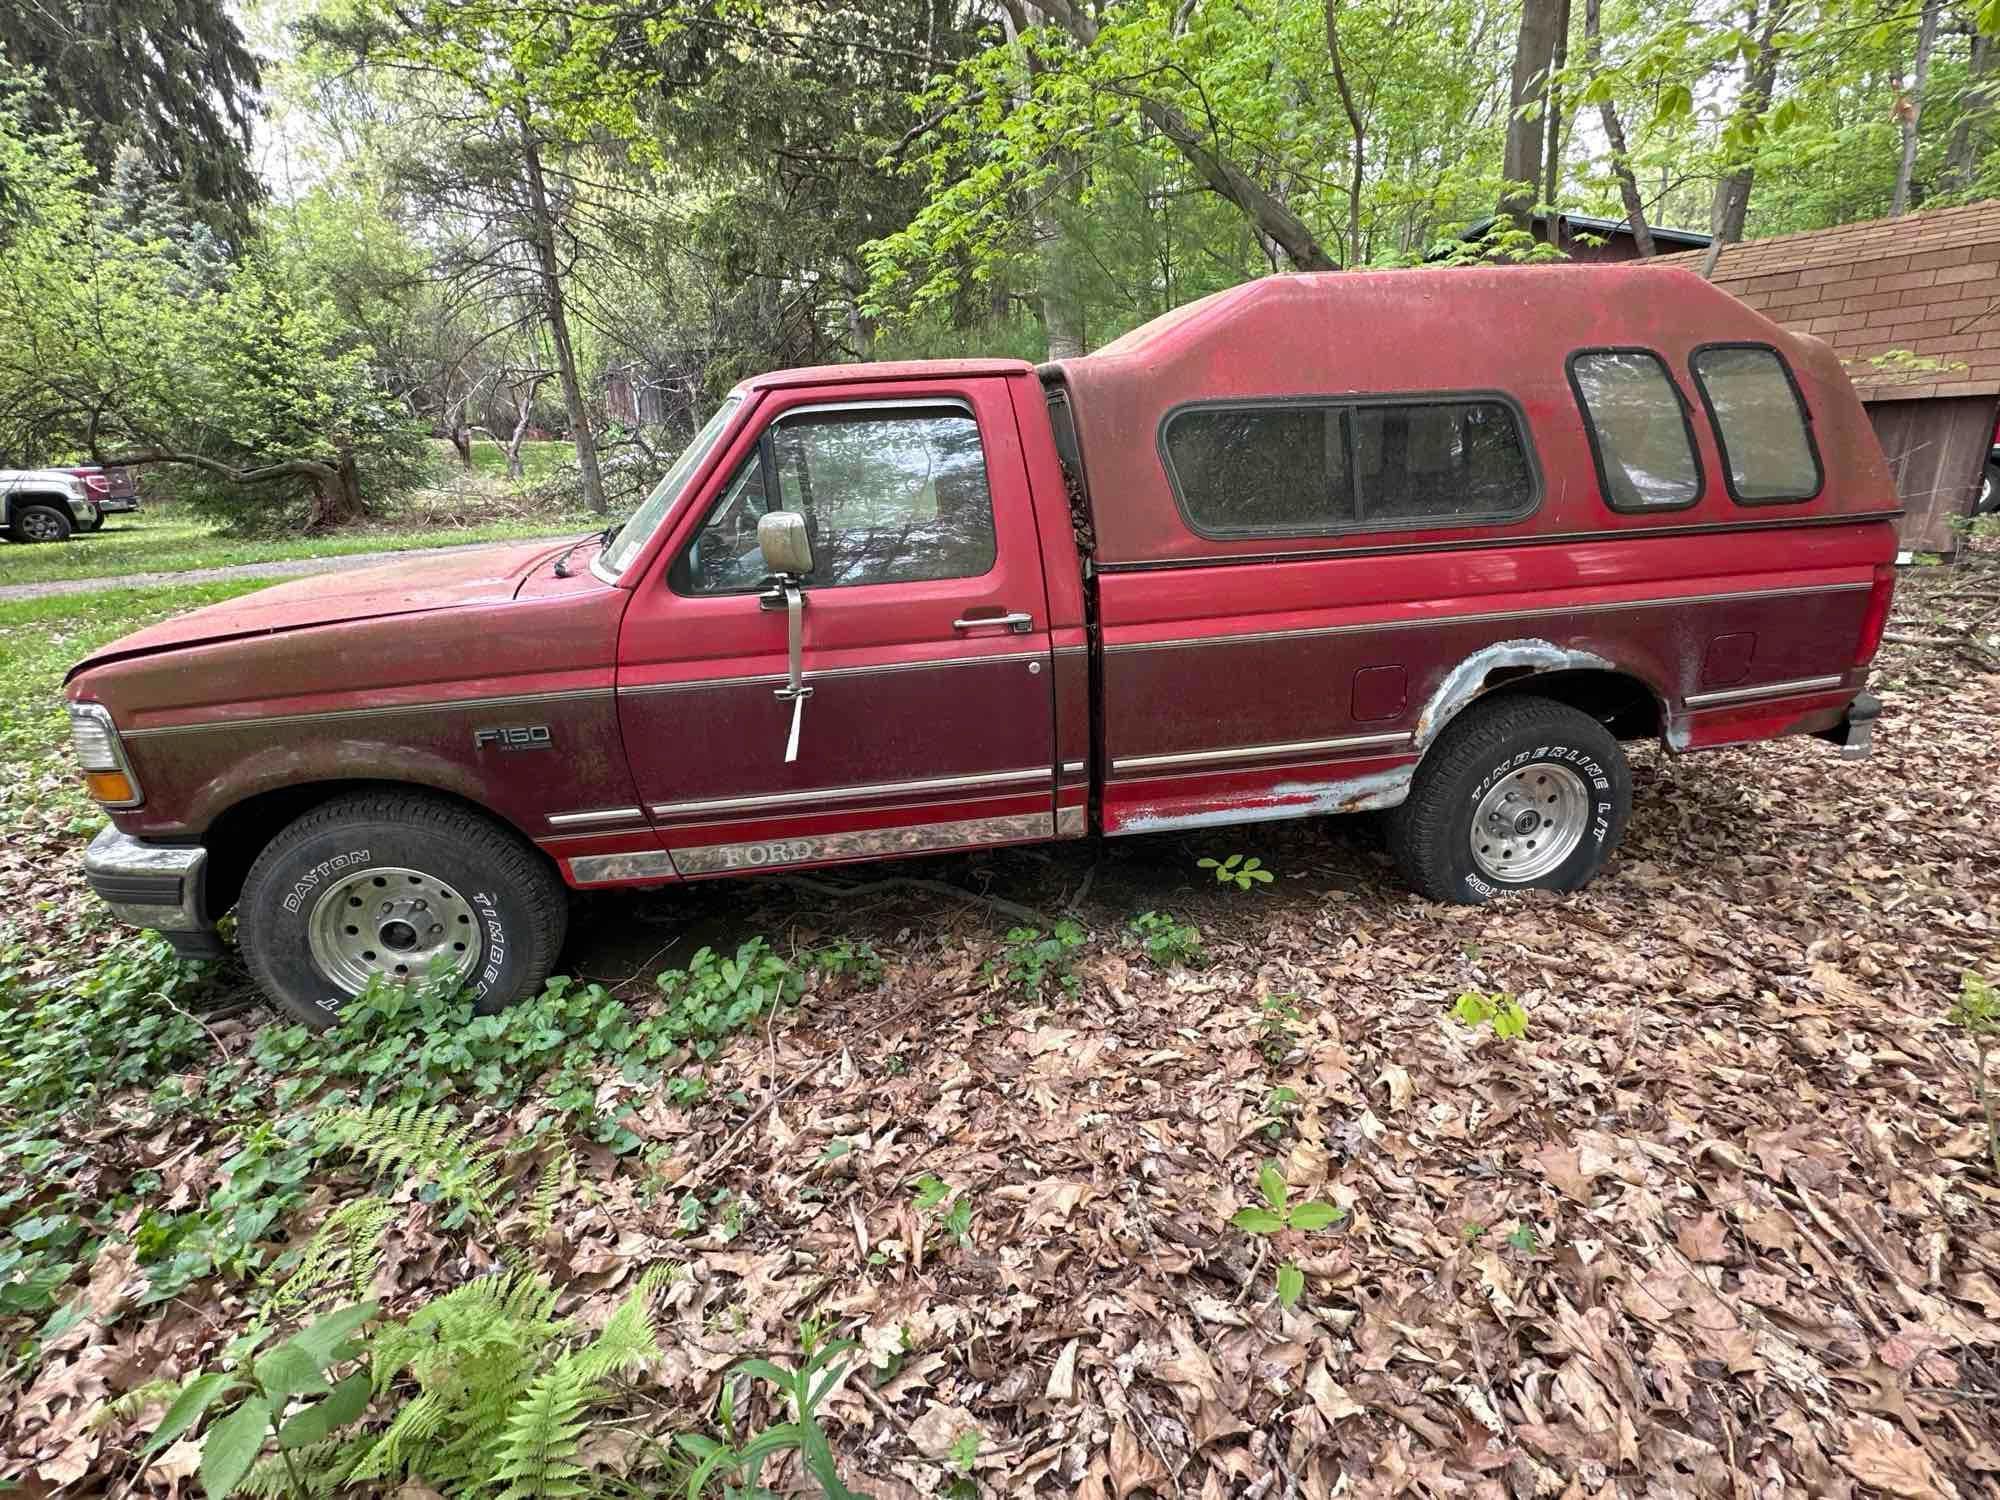 1993 Ford F150 Pick Up Truck 4x2 with cap, not running